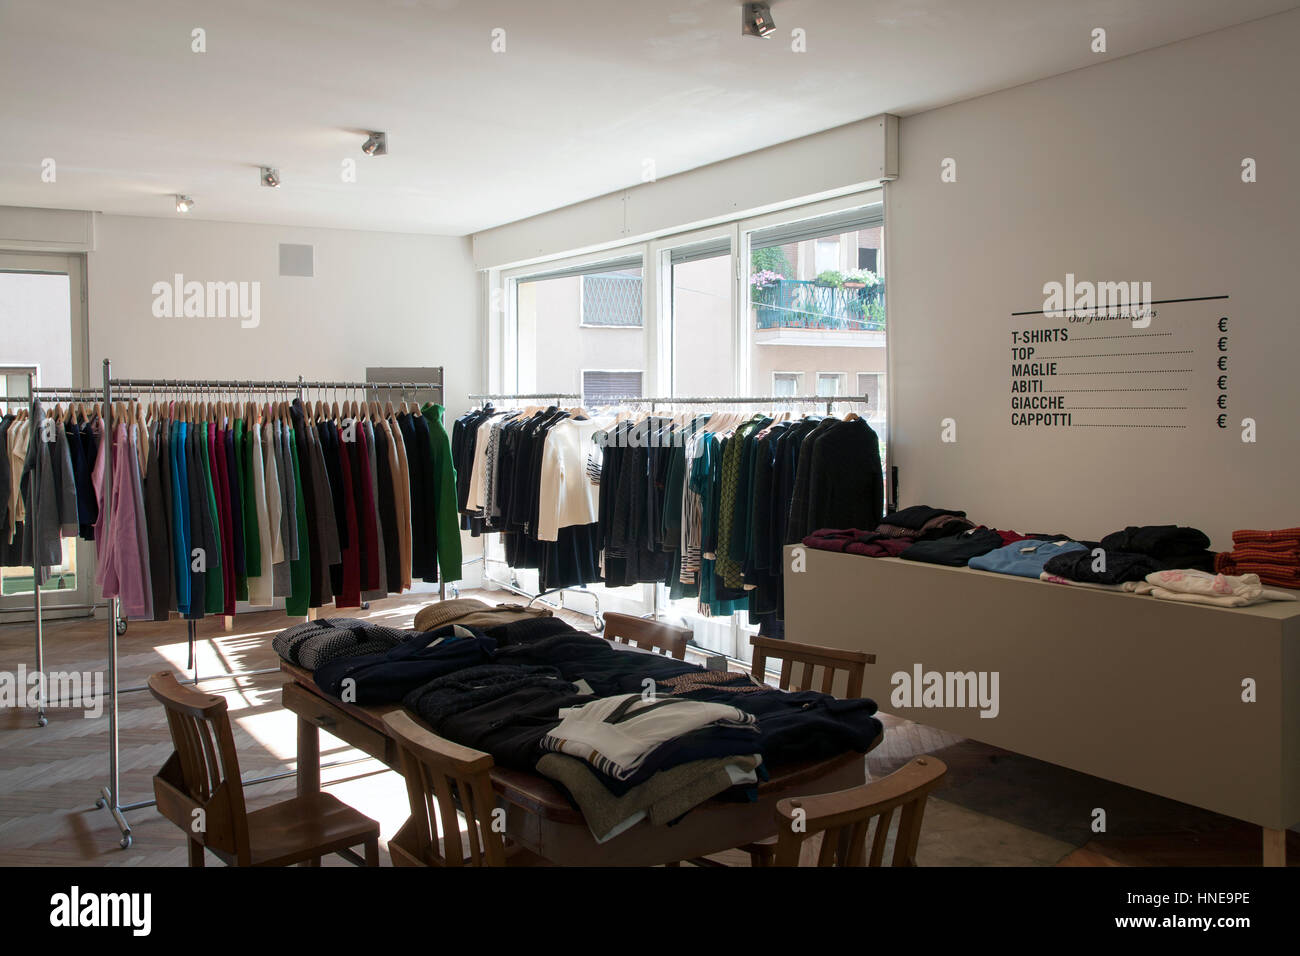 Interior of a small commercial storage room of a clothing store for women Stock Photo